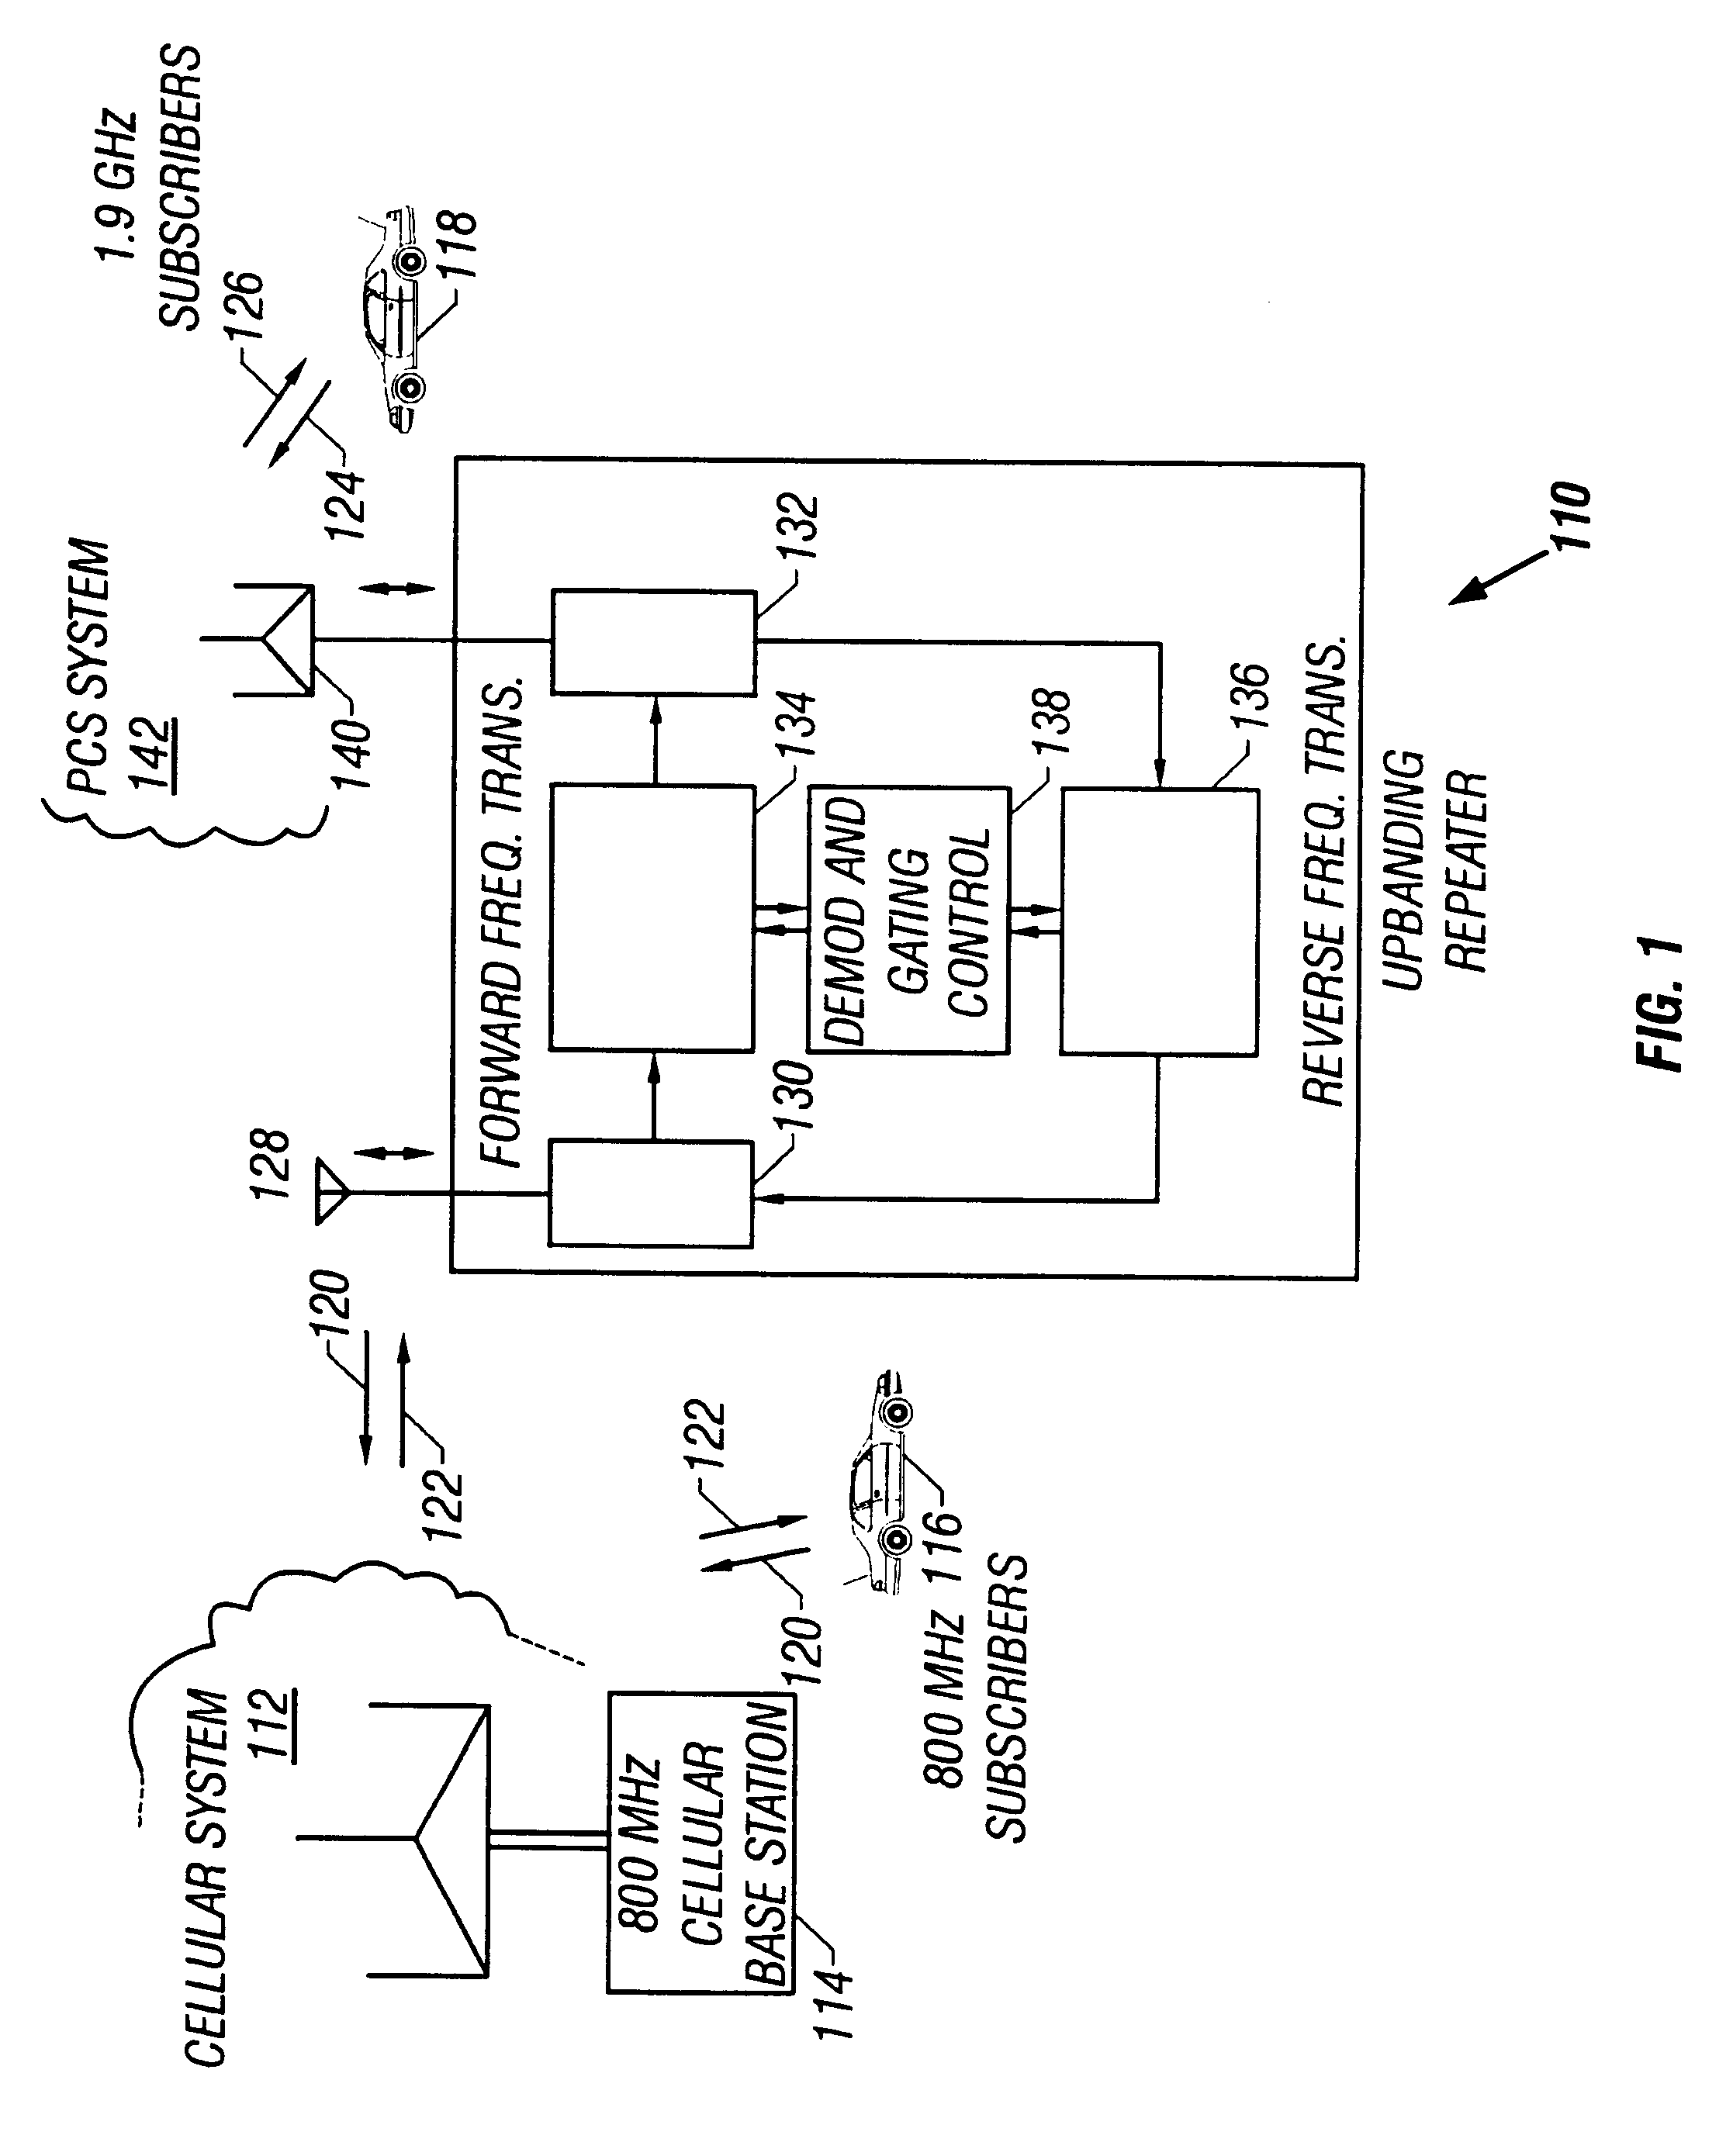 Band-changing repeater with protocol or format conversion